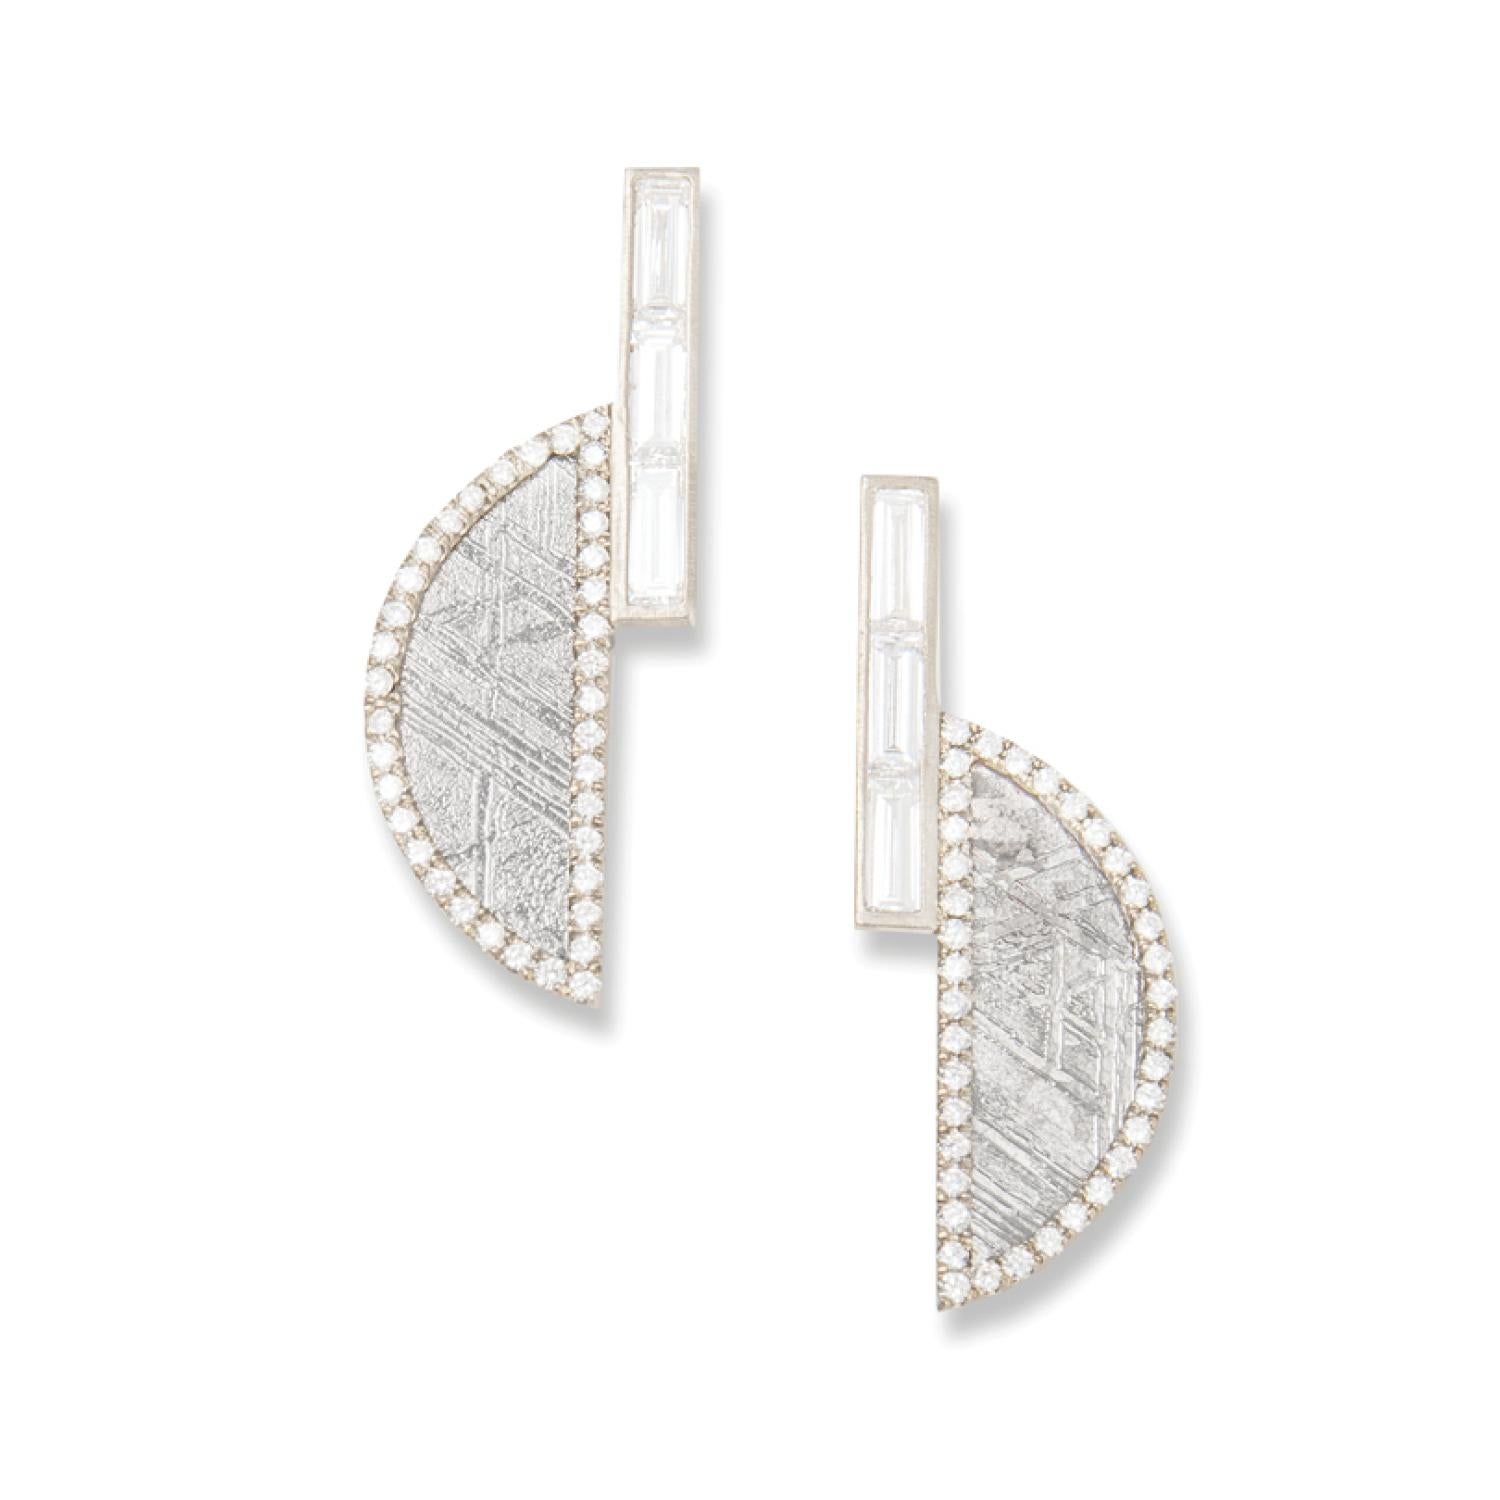 Widmanstätten pattern meteorite slice crescent earrings with white diamond baguettes and white diamond pavé, 18 carat recycled white gold, 0.63 TCW  - One-of-a-kind

Inspired by the intersection of Earth and cosmos, crescents of 4.6 billion year old